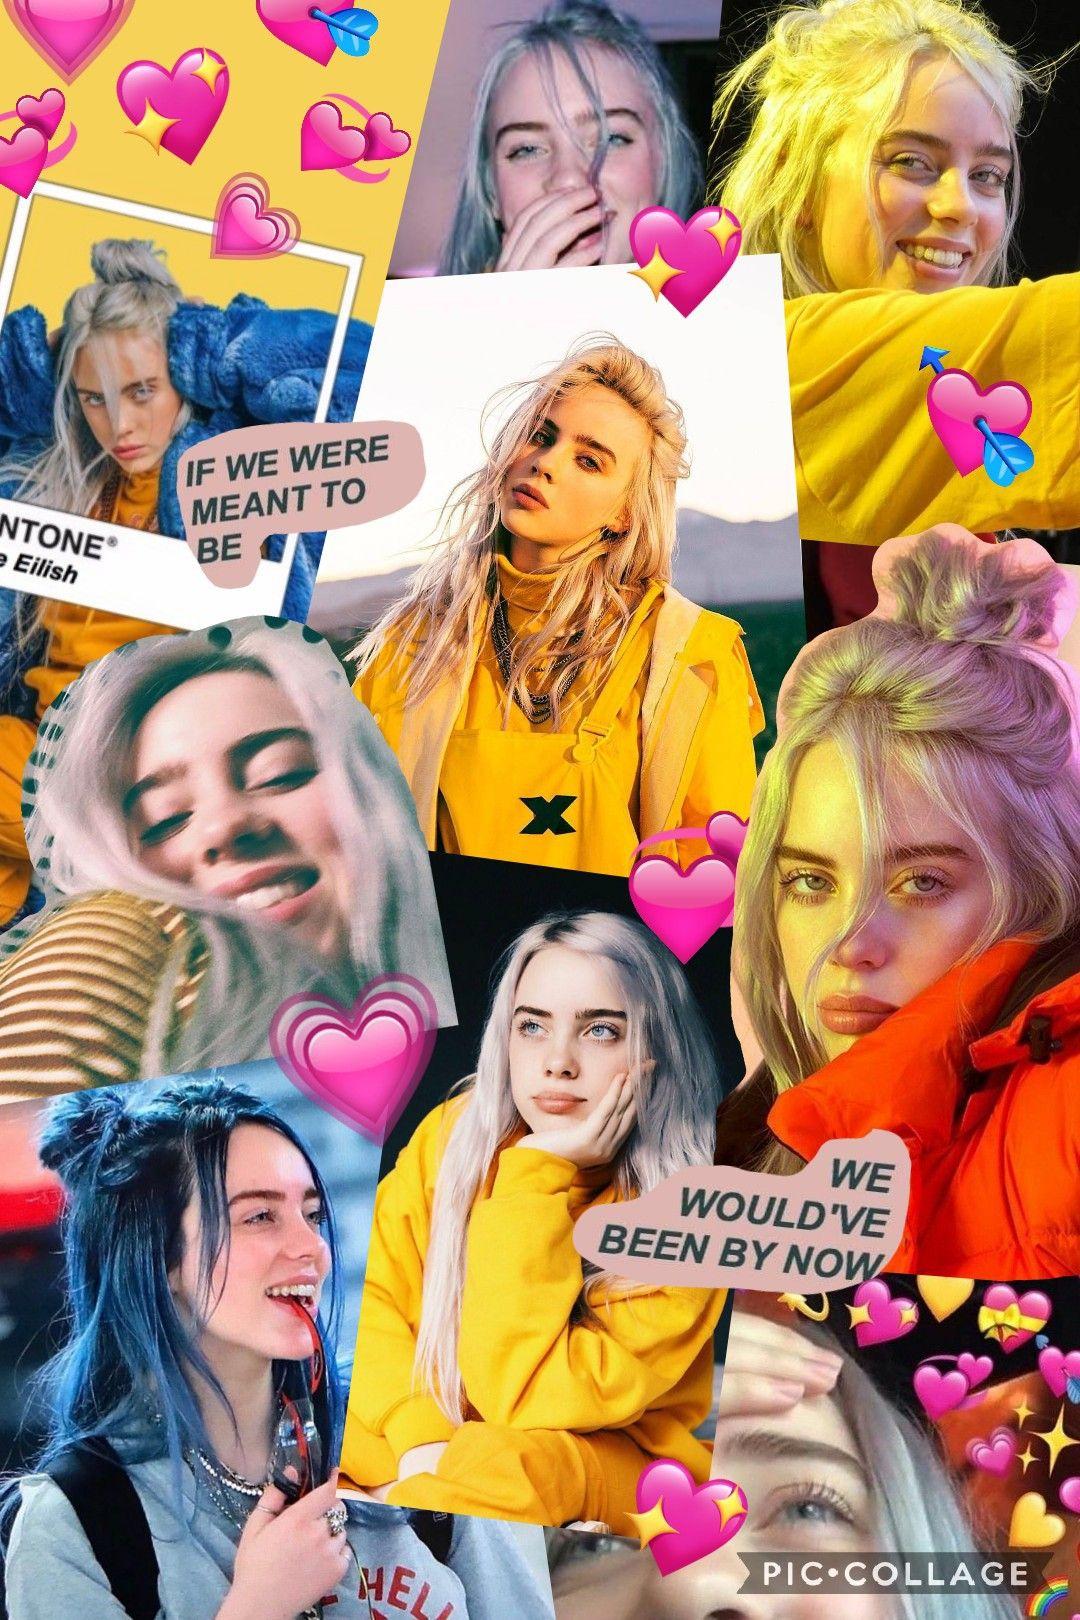 Billie eilish collage wallpaper made by me! Feel free to use :) Billie eilish cute wholesome aesthetic follow. Billie, Billie eilish, Aesthetic collage